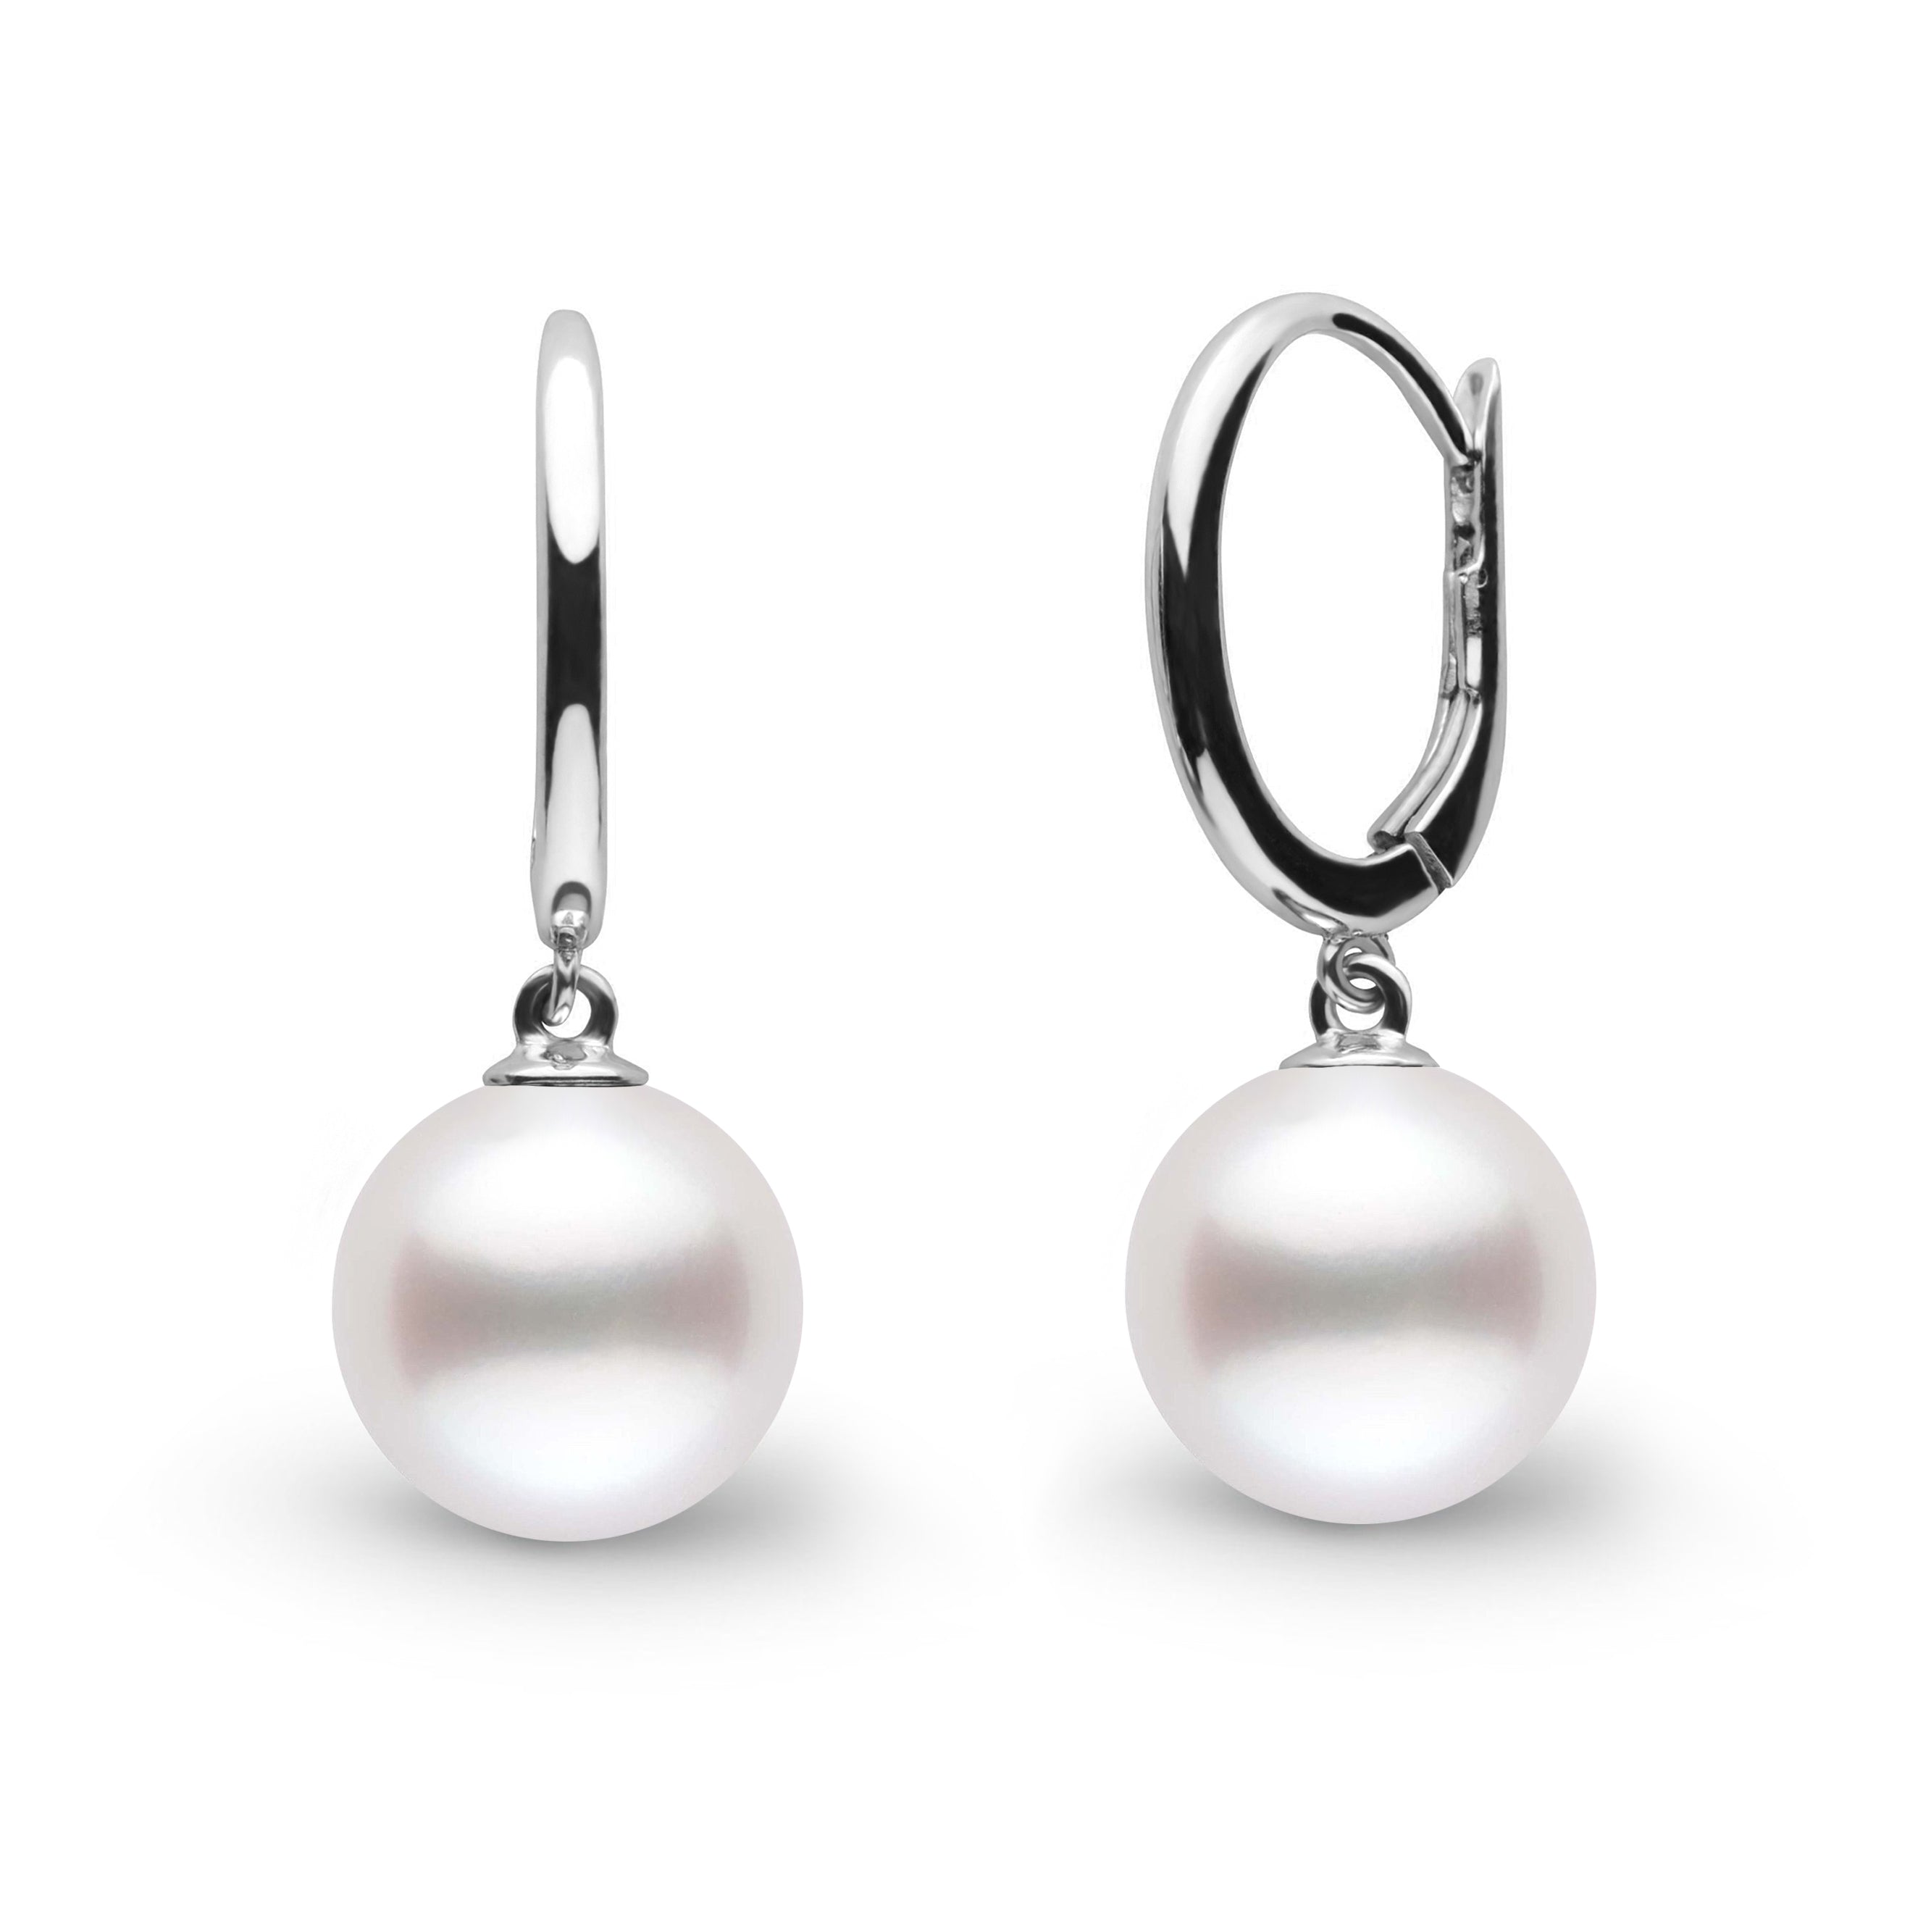 Solid Eternal Collection 9.0-10.0 mm White South Sea Pearl Earrings